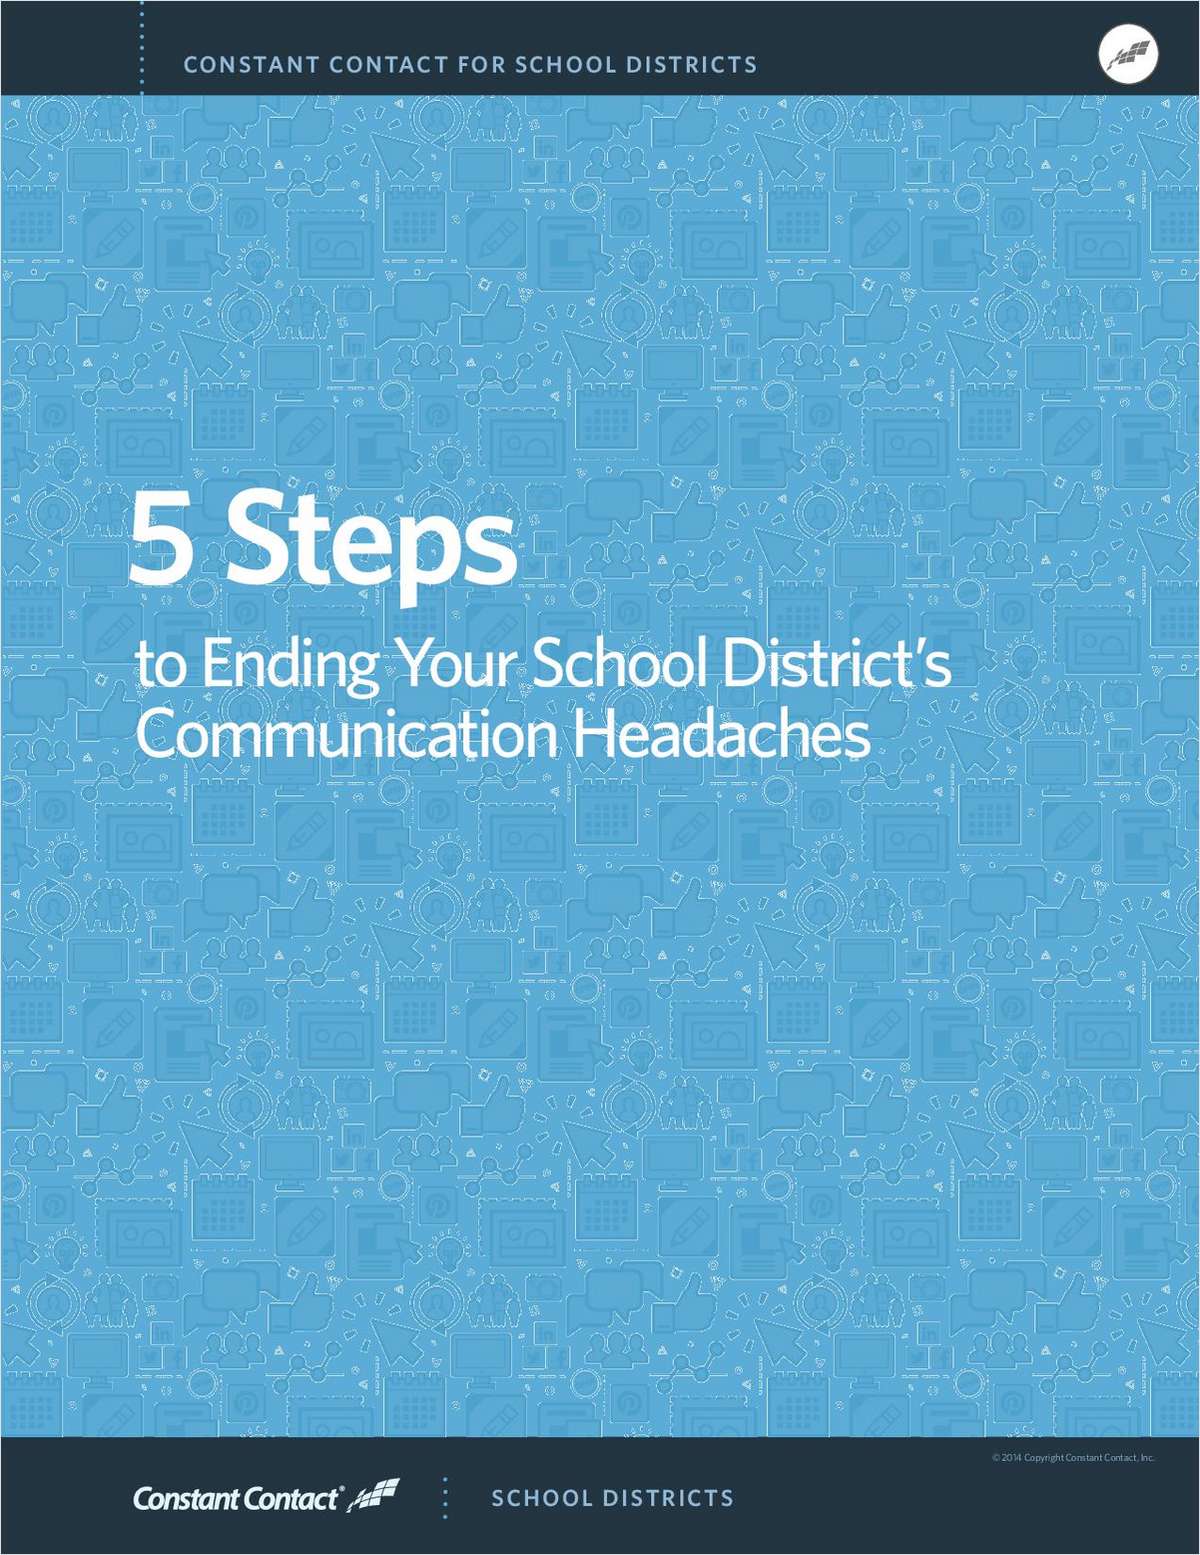 5 Steps to Improve Your K12 School District's Communication Headaches